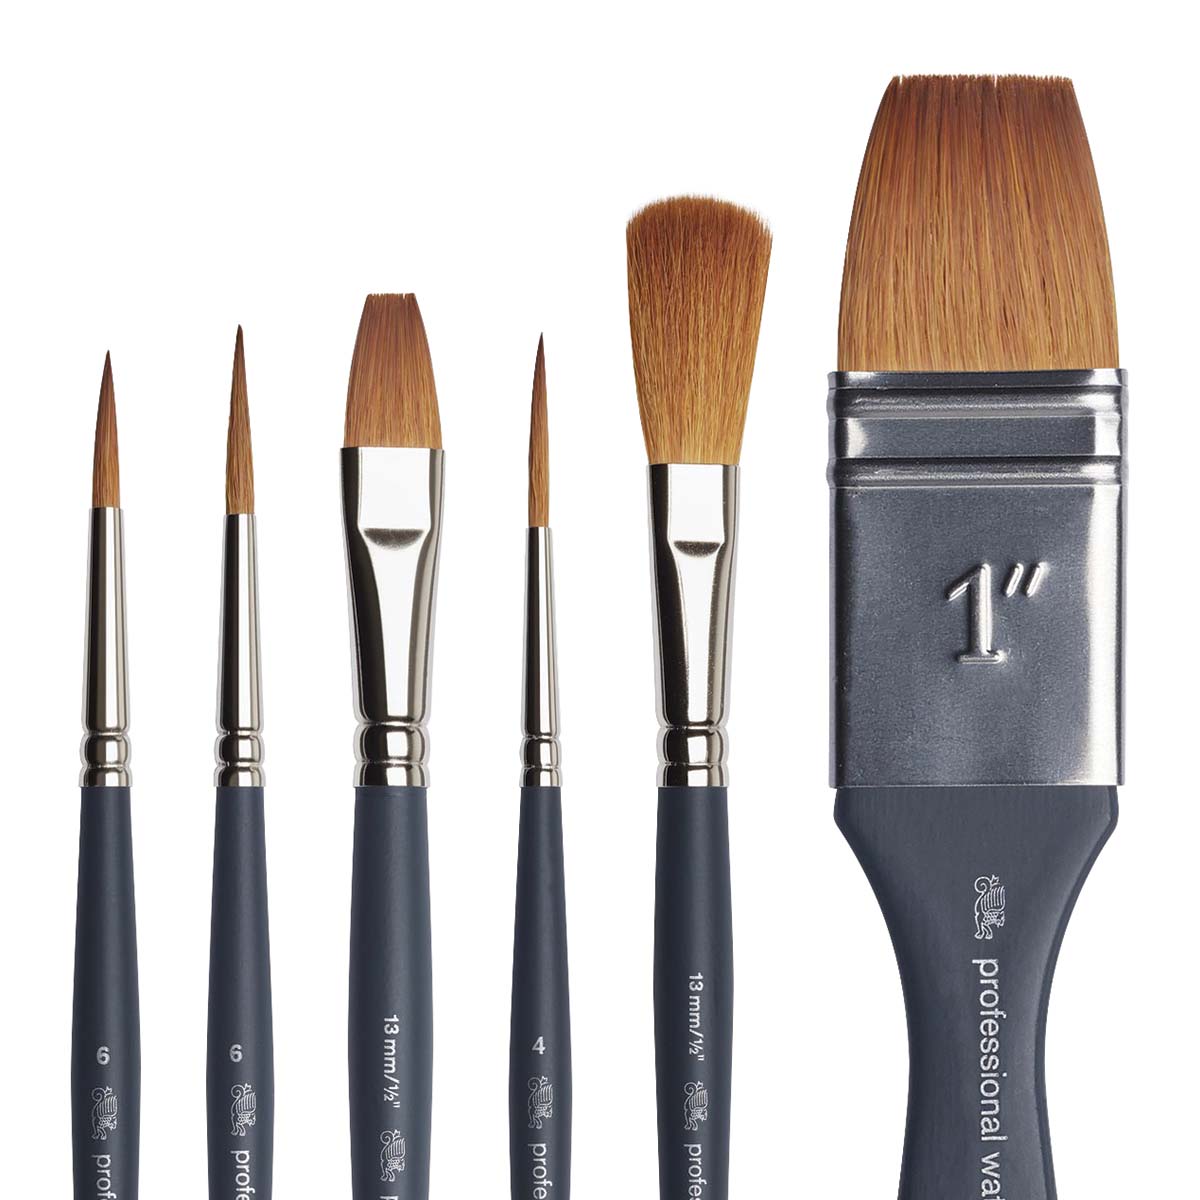 Winsor & Newton Professional Watercolor Synthetic Sable Brush Rigger 6